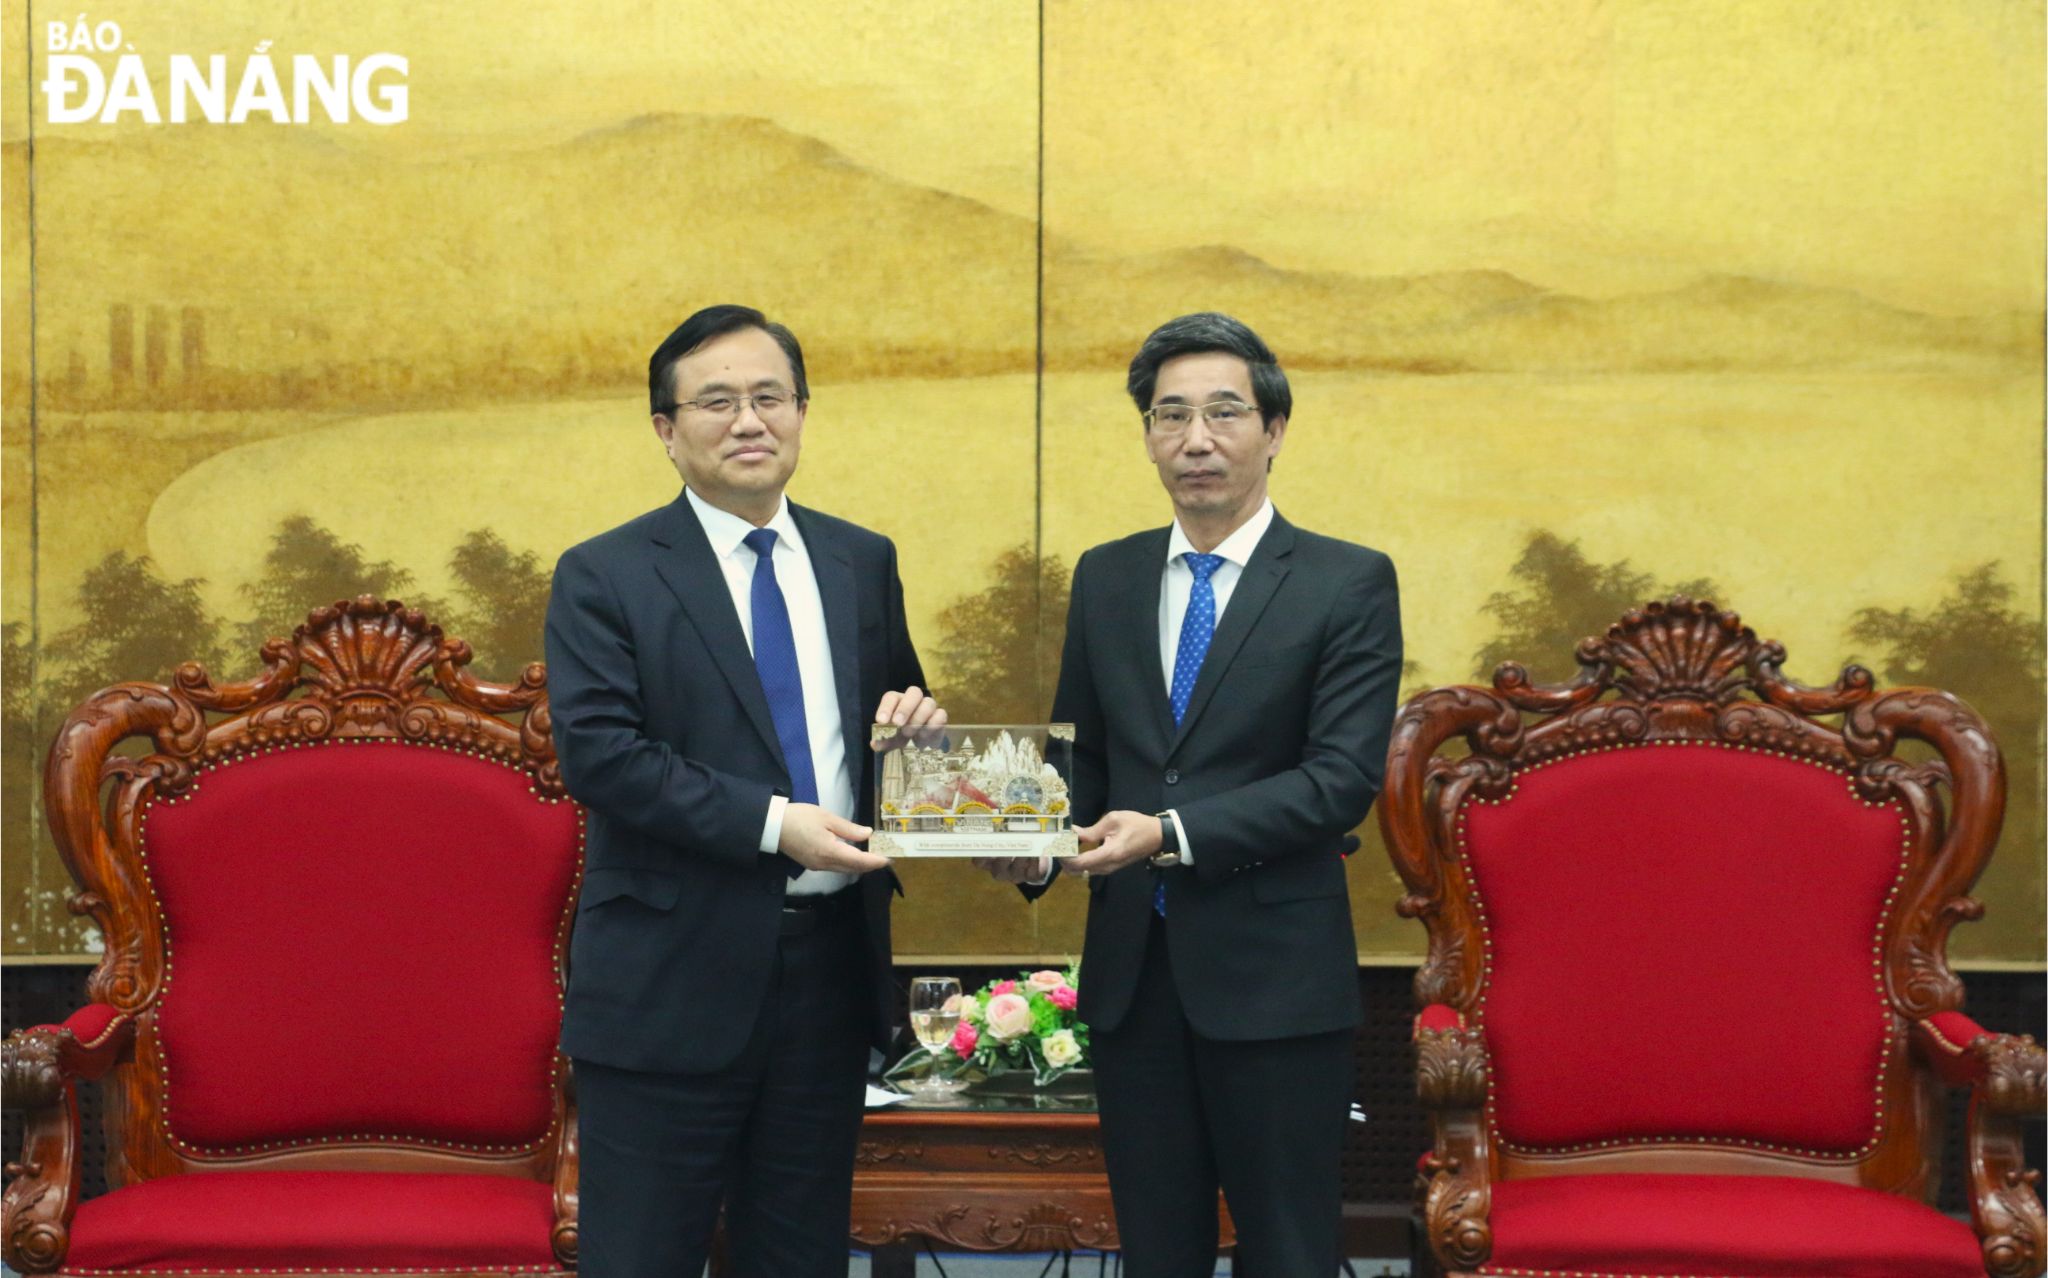 Vice Chairman of the Da Nang People's Committee Tran Chi Cuong (right) presents a souvenir to Vice Governor of Shandong Province Song Junji. Photo: T.PHUONG